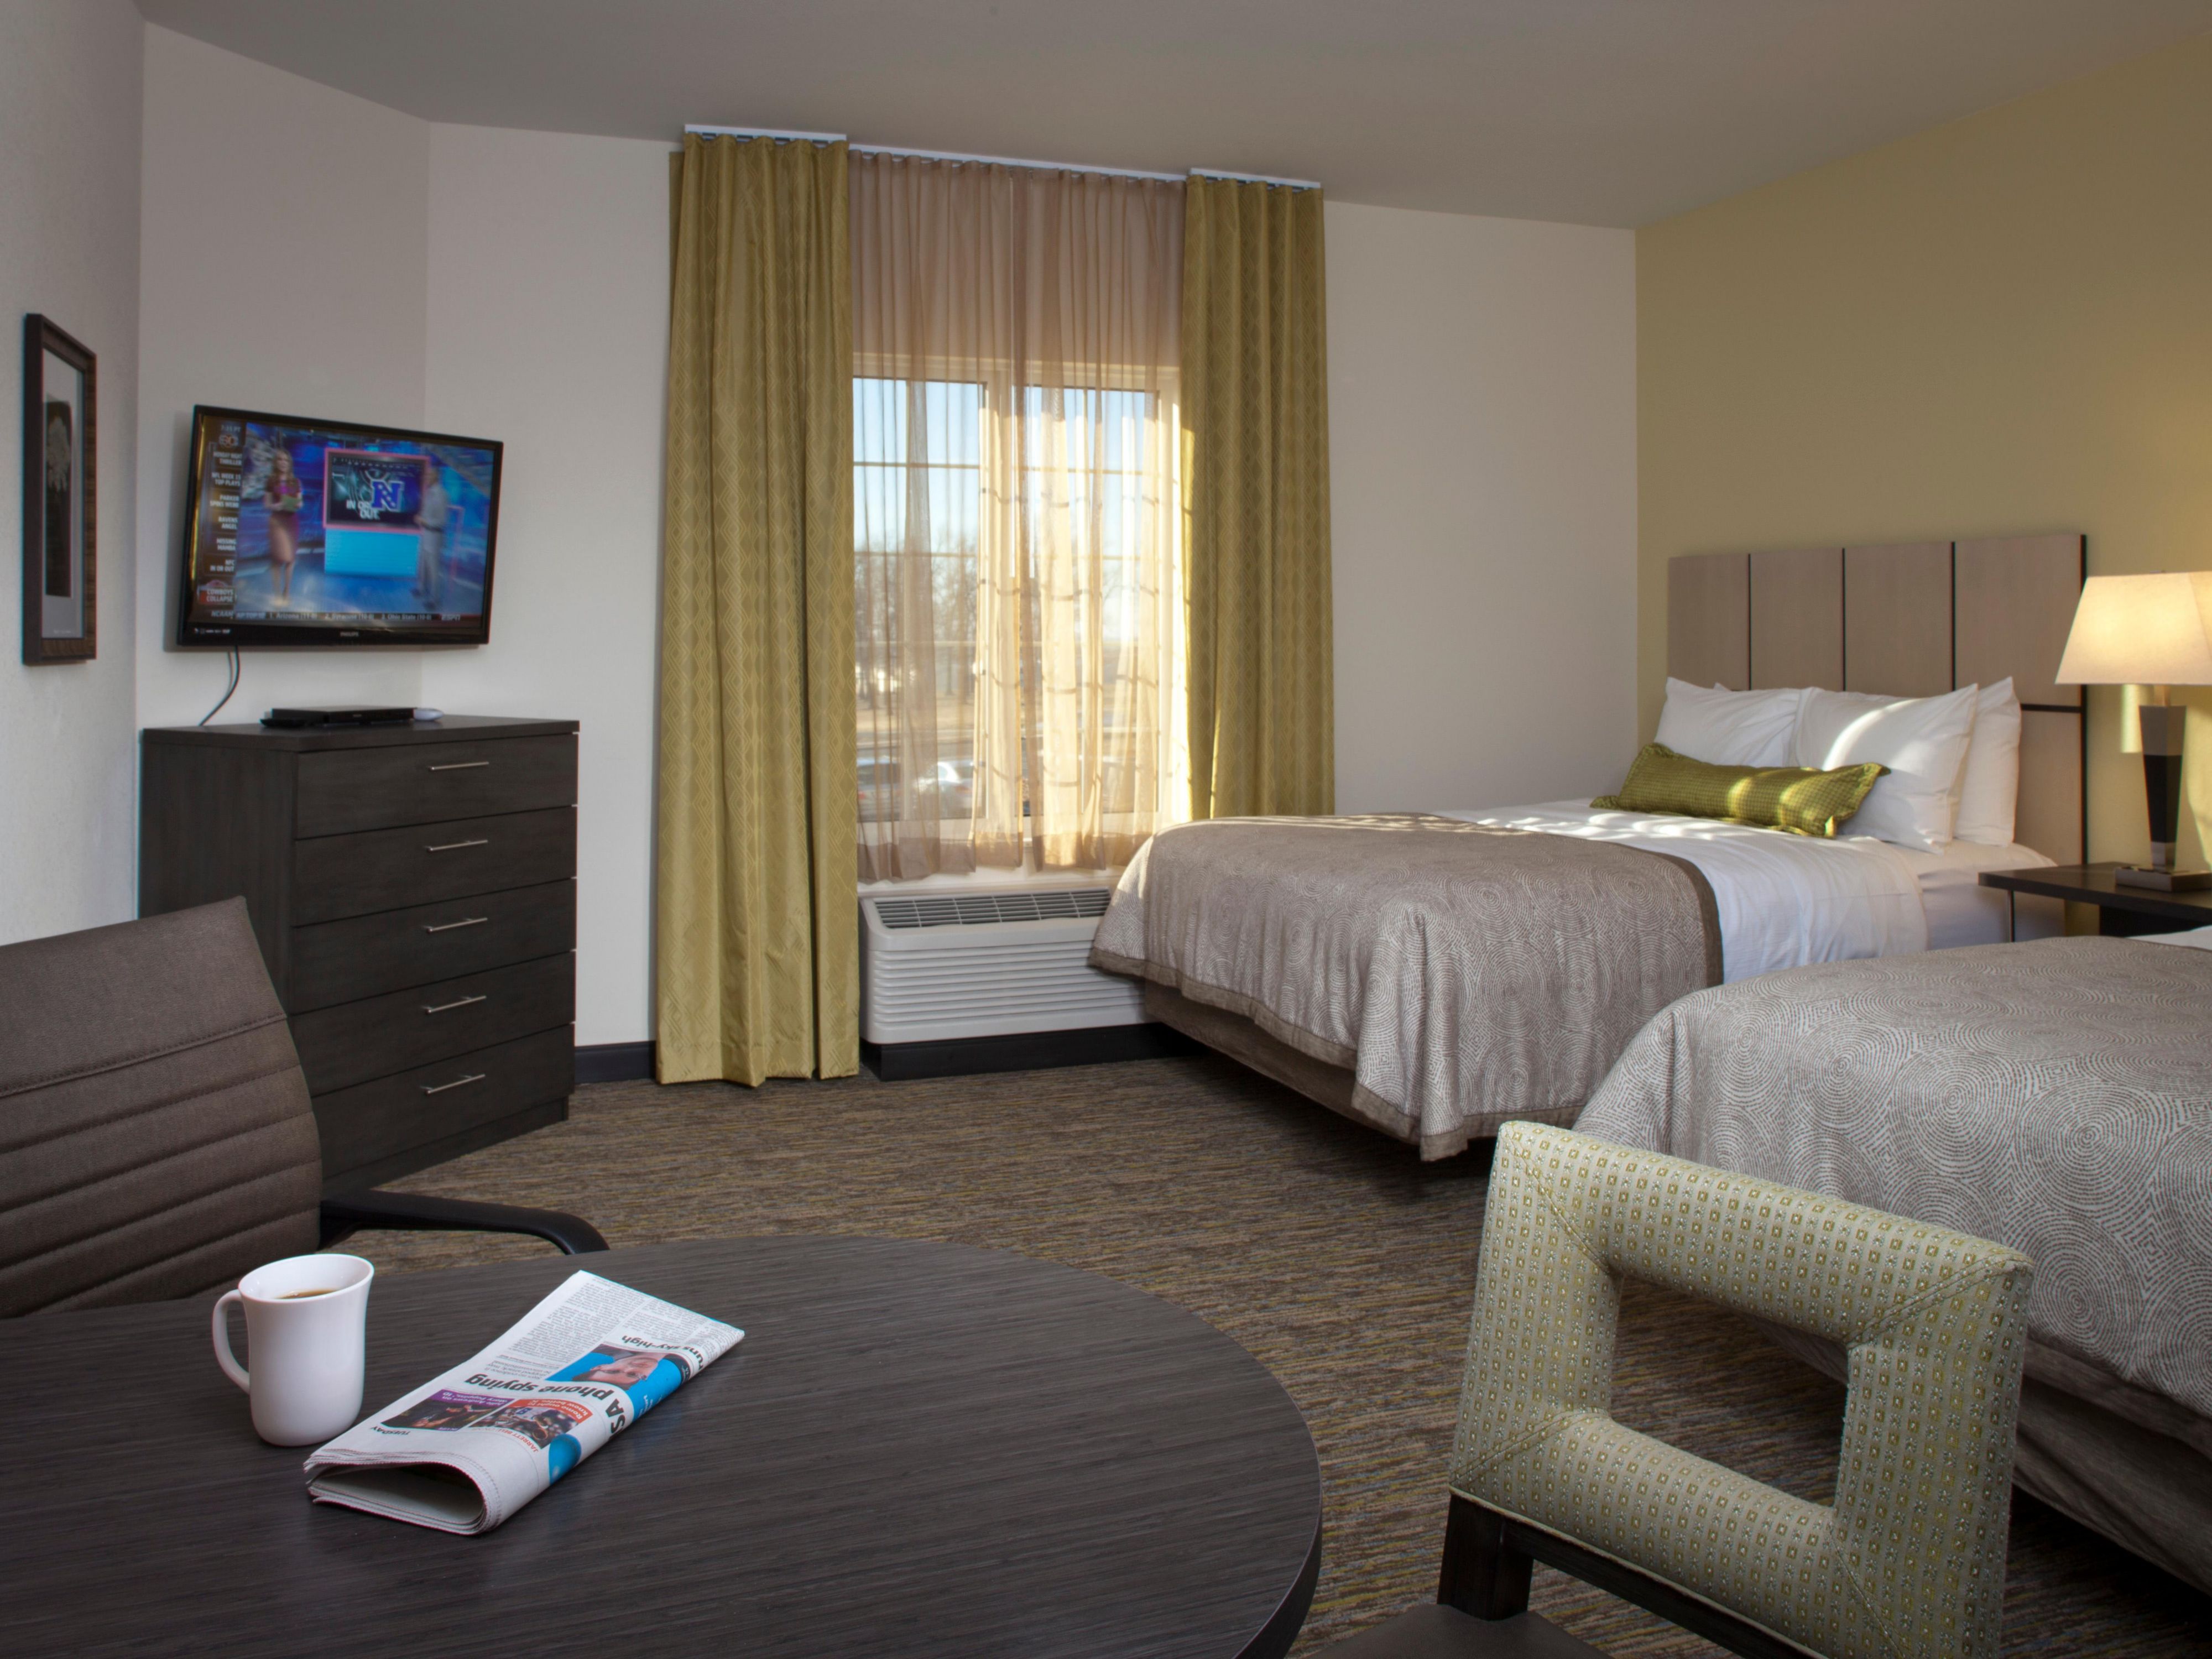 Rooms and Rates for IHG Army Hotels Building 2426 at Ft 